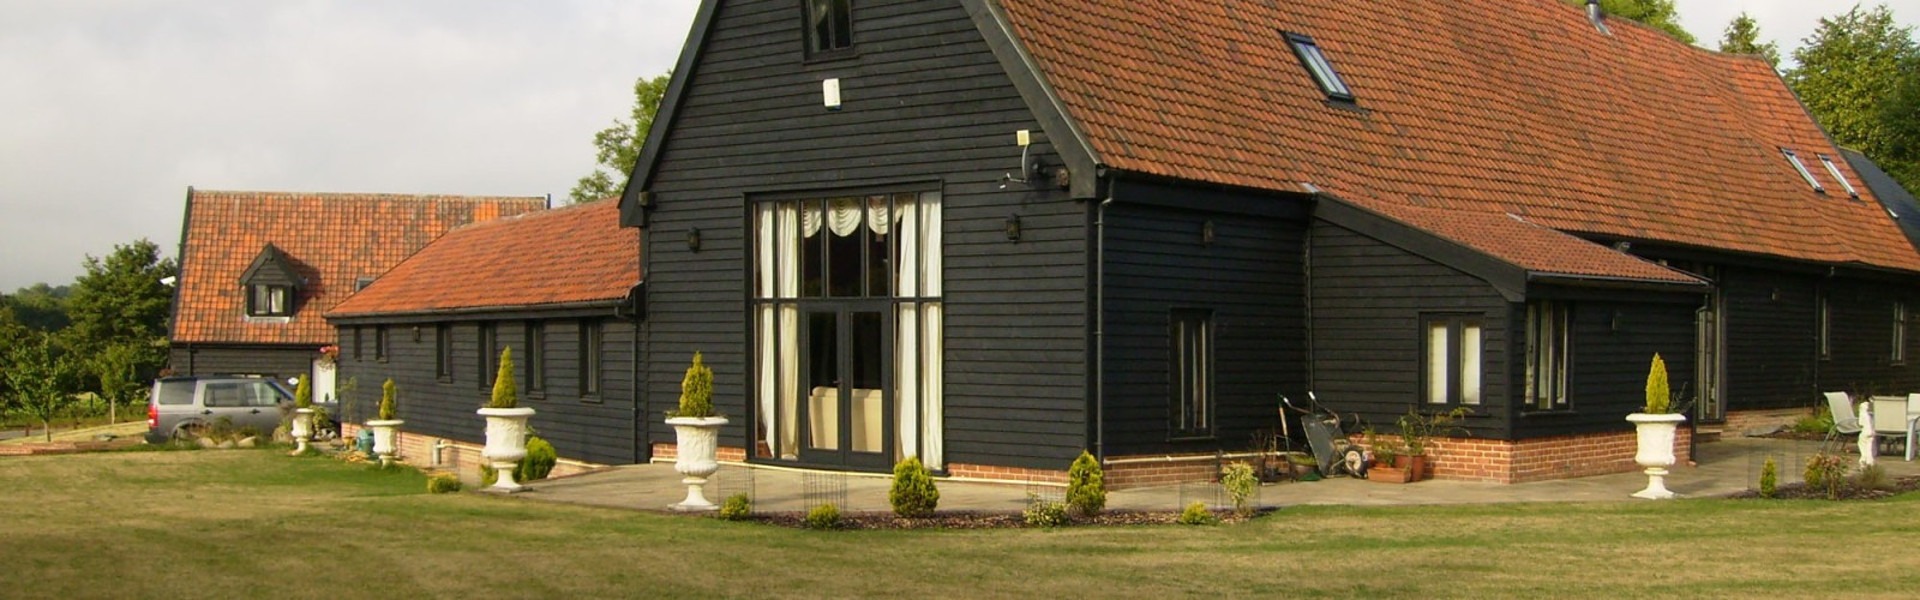 self catering in suffolk